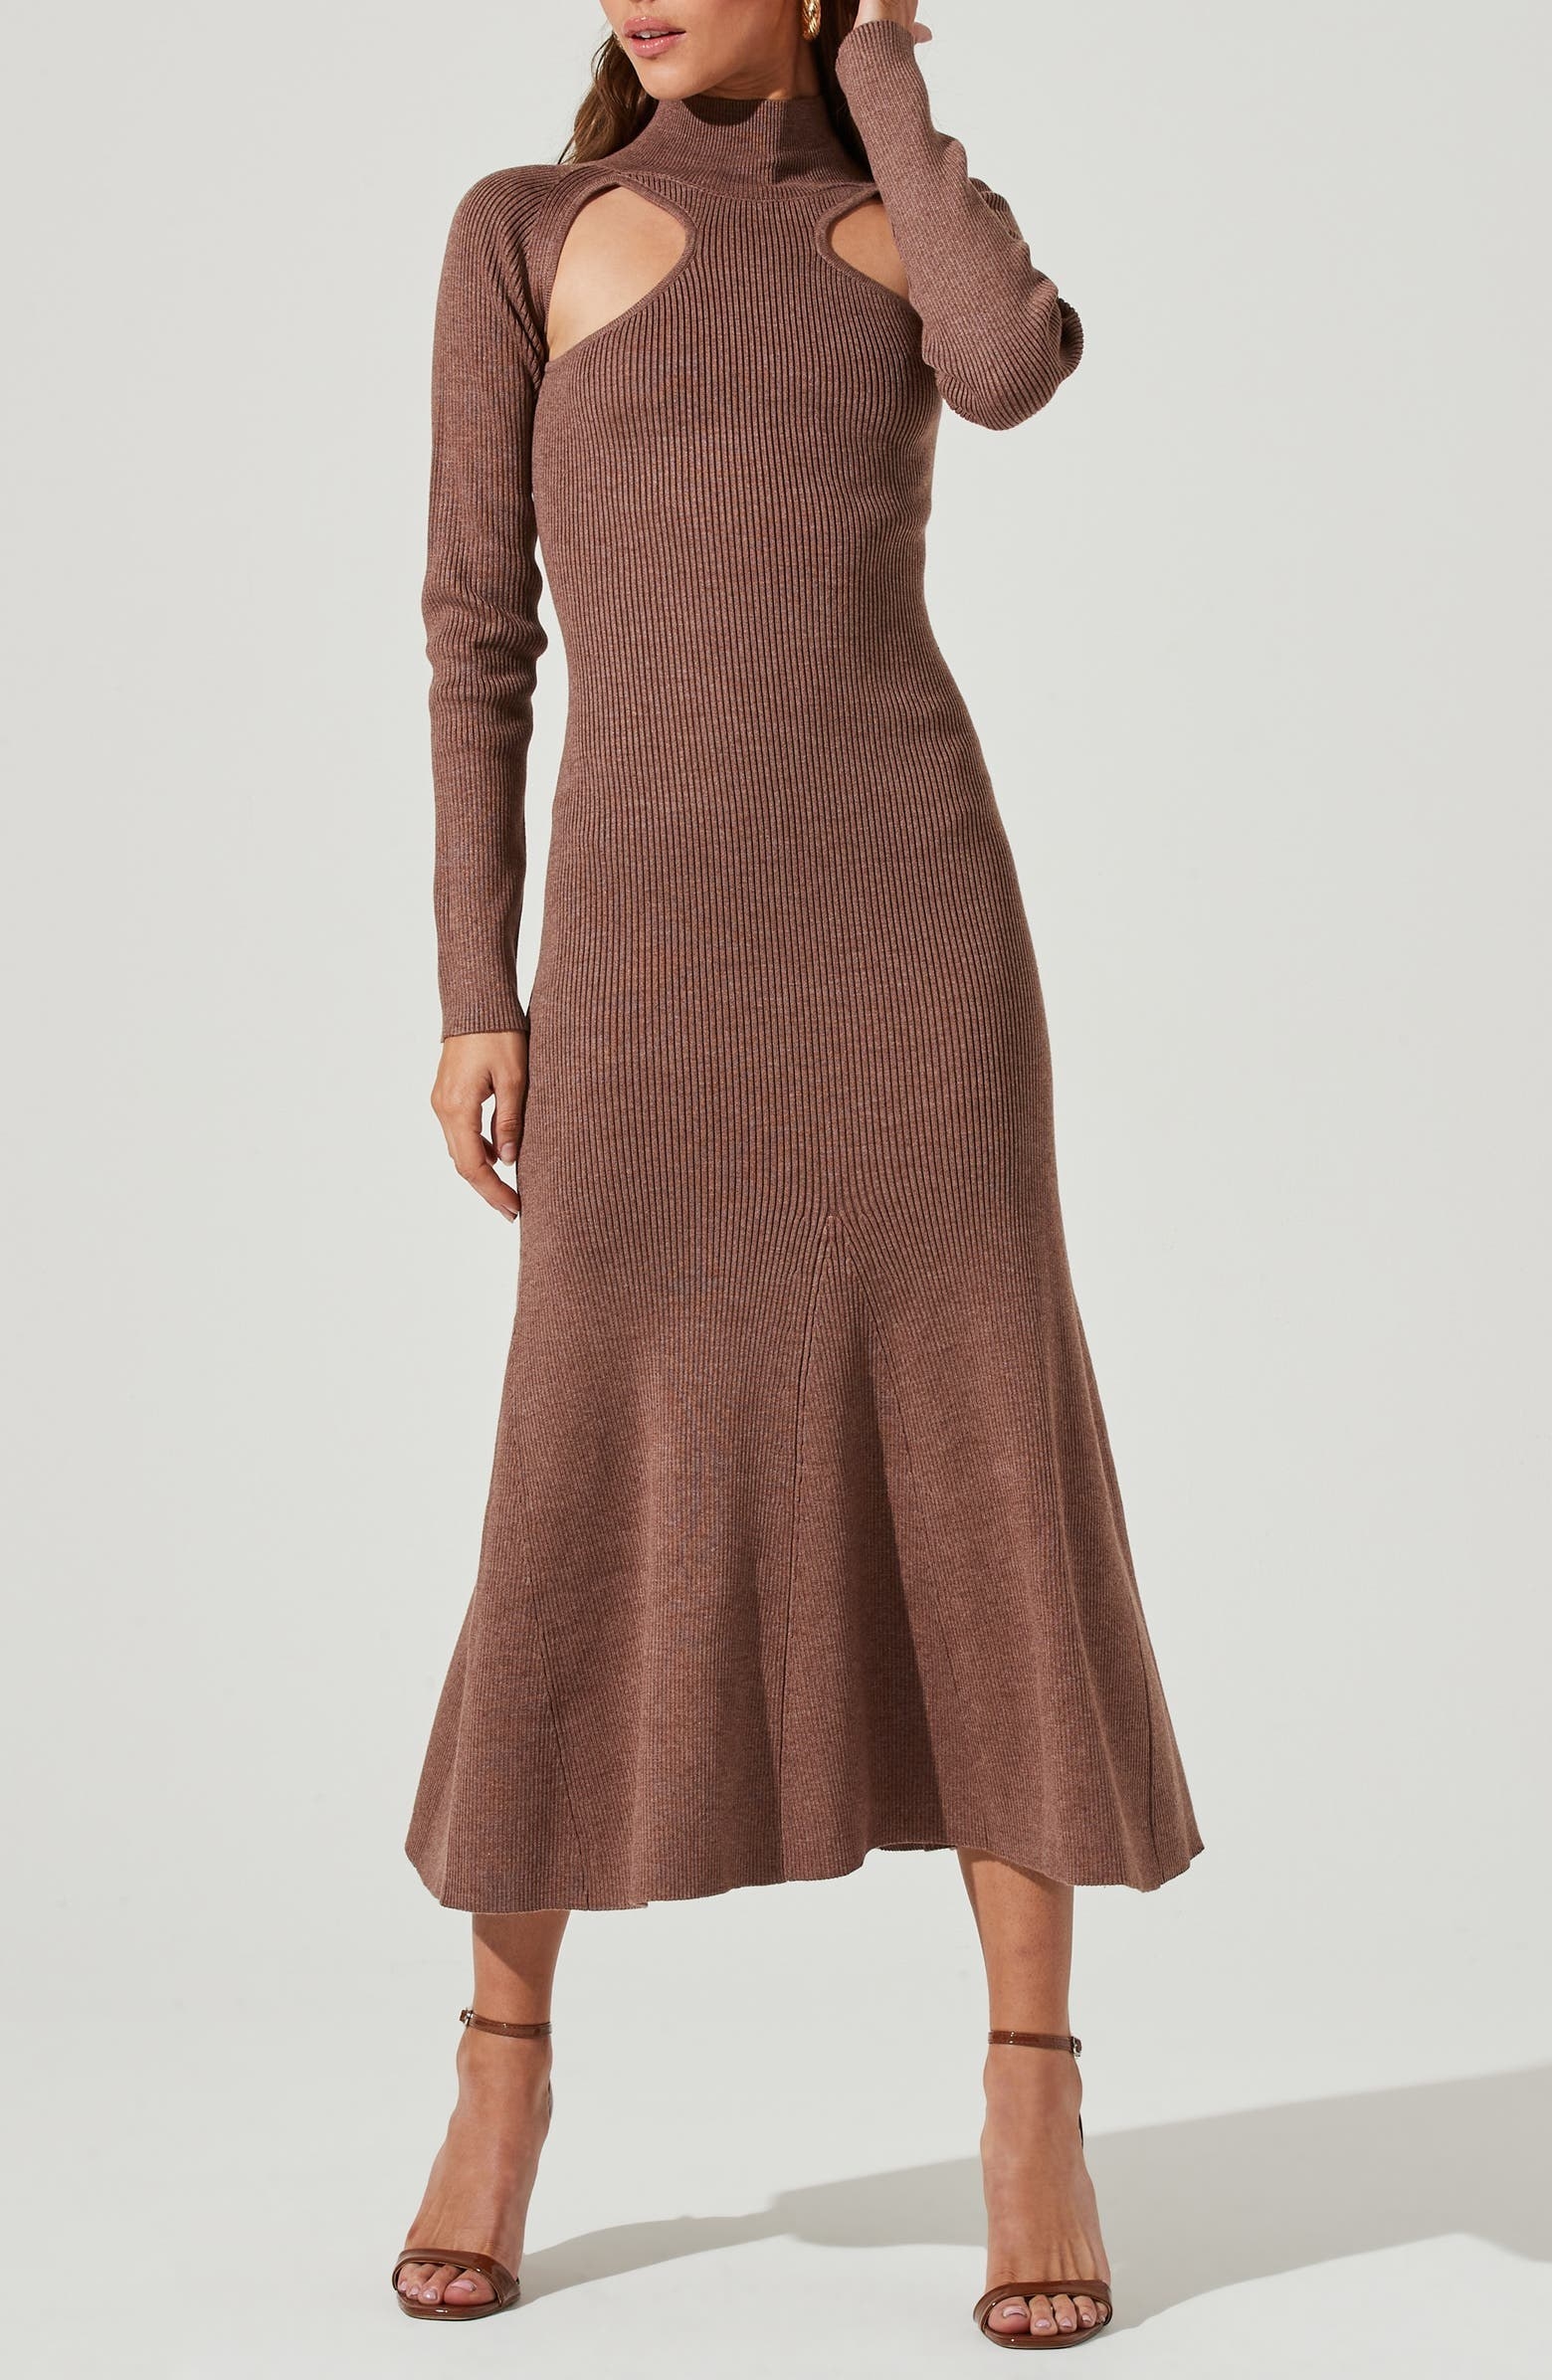 A model wearing the dress in brown